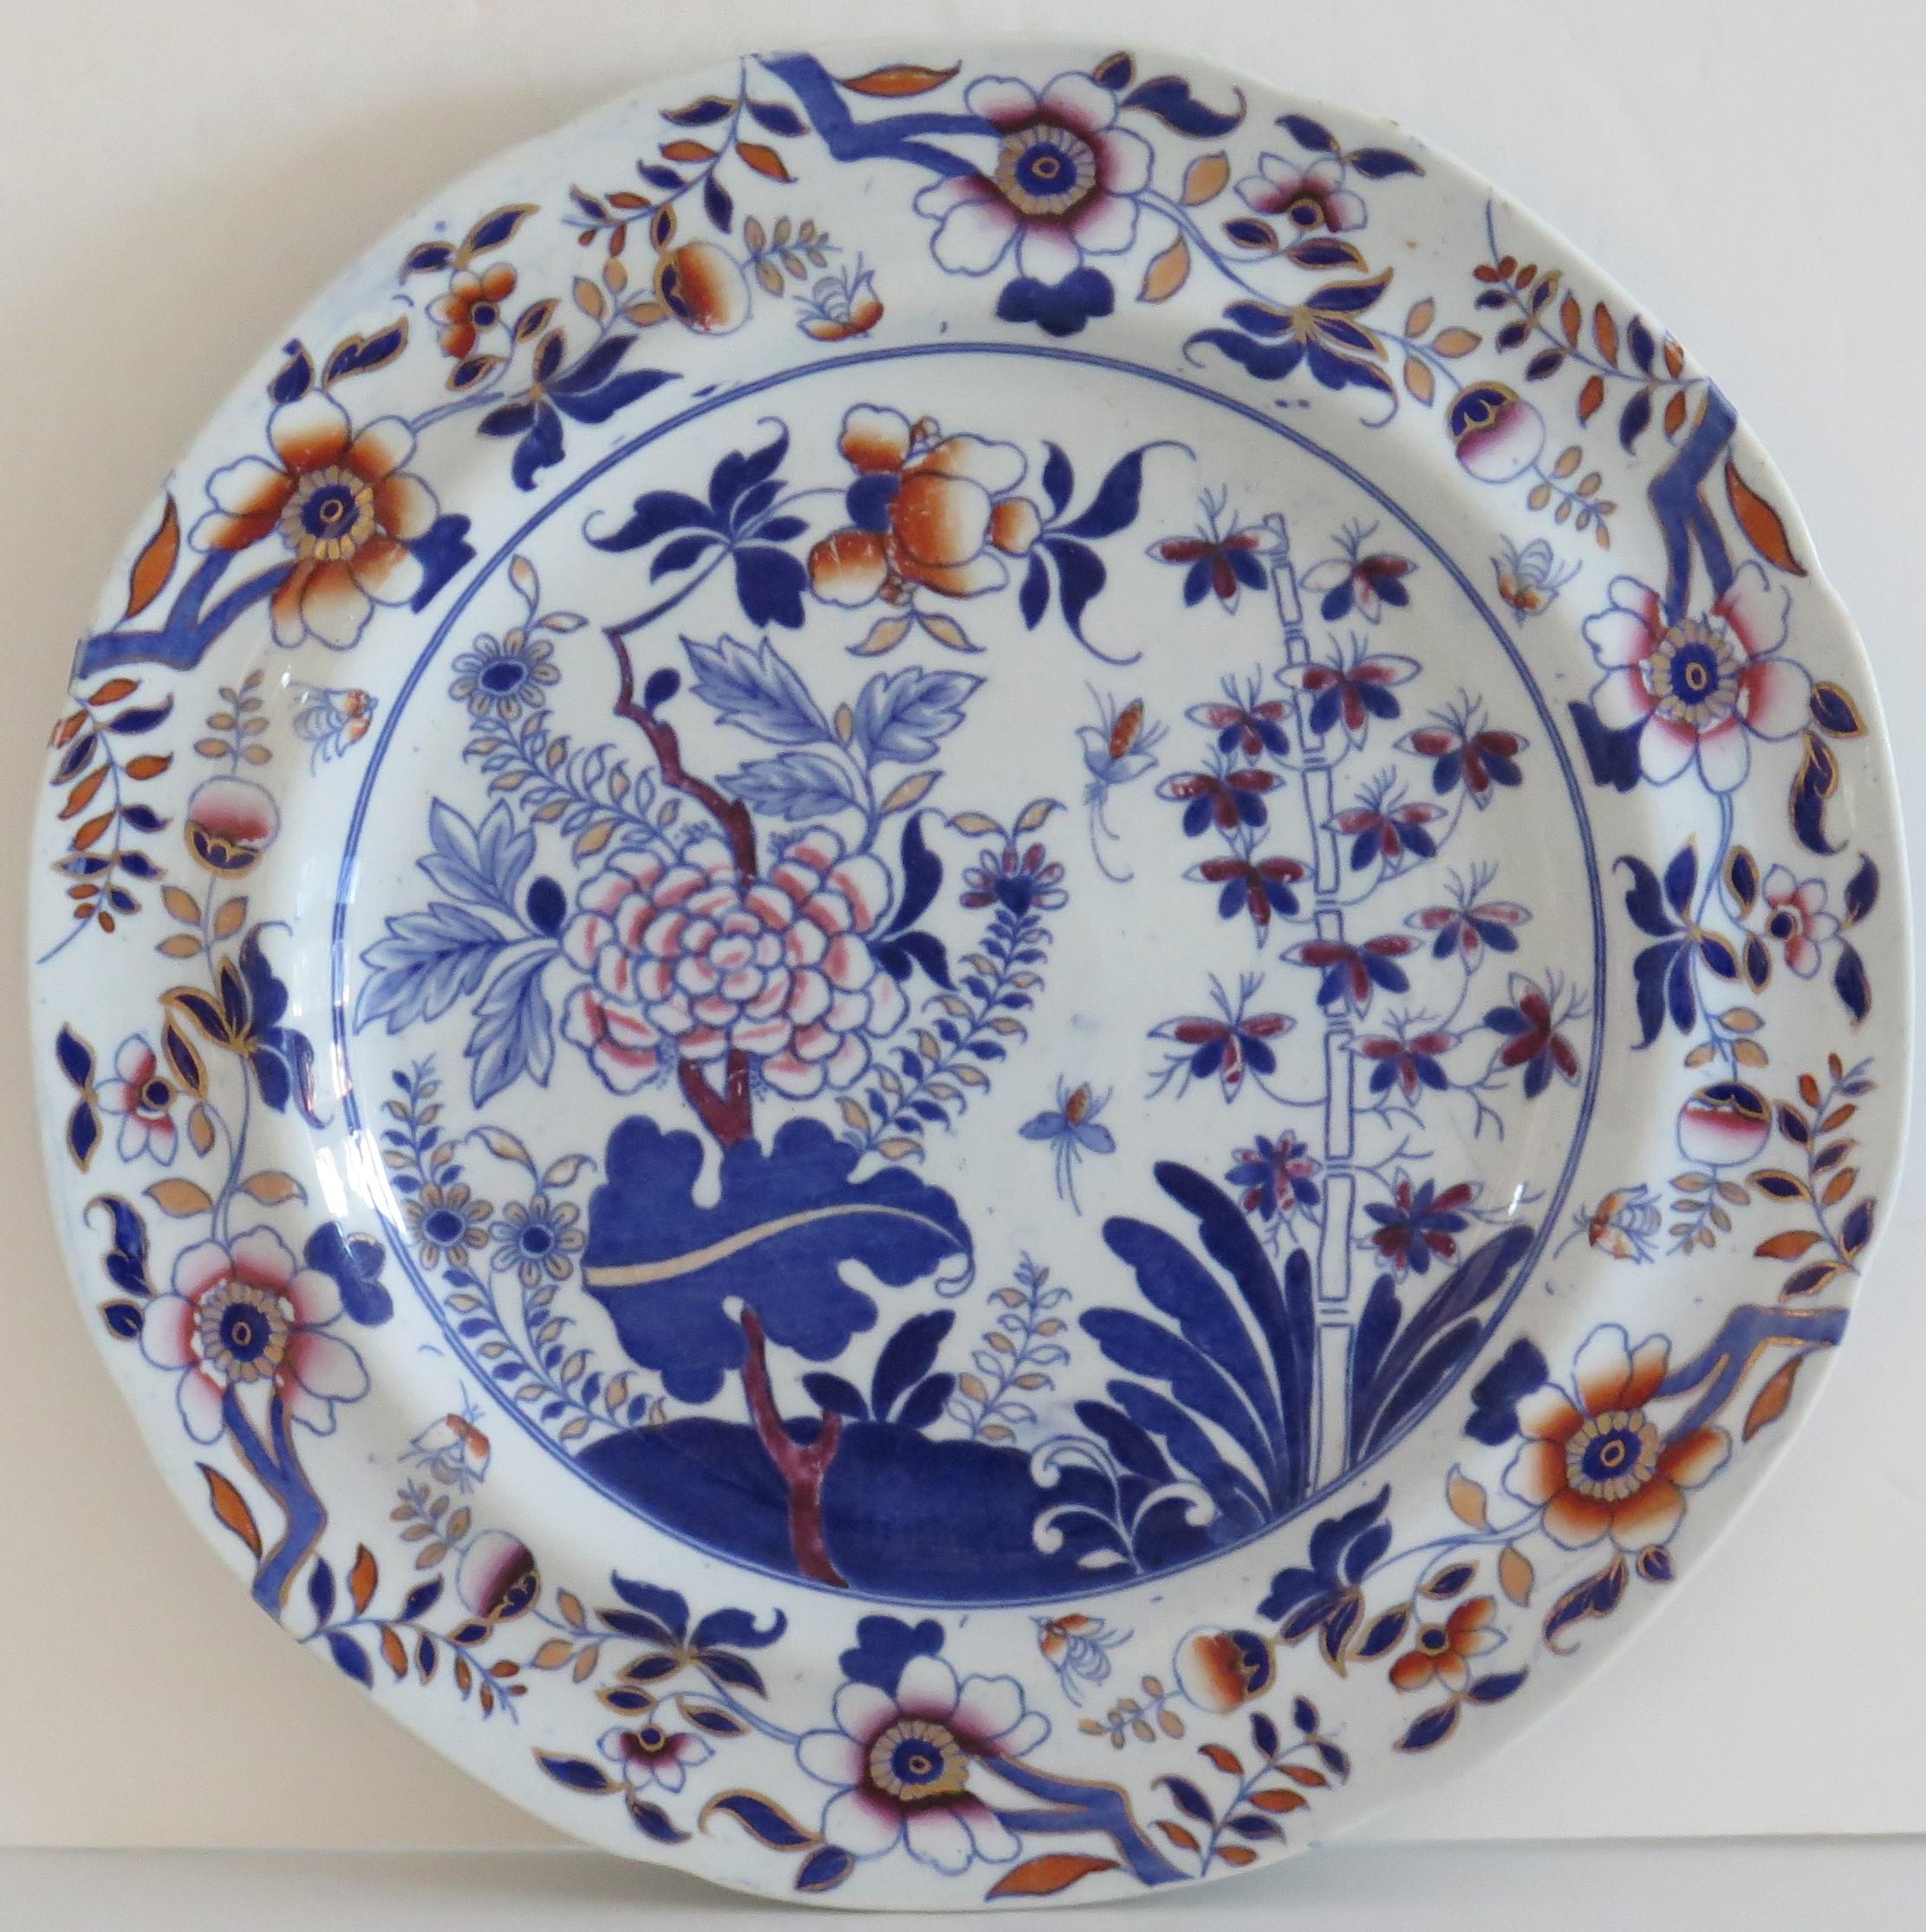 This is a beautiful plate in the Chinese inspired pattern number 4089, produced by the Copeland - Late Spode factory and made of earthenware pottery called Pearl-ware, in the mid 19th century, circa 1850.

This plate is well potted with a recessed